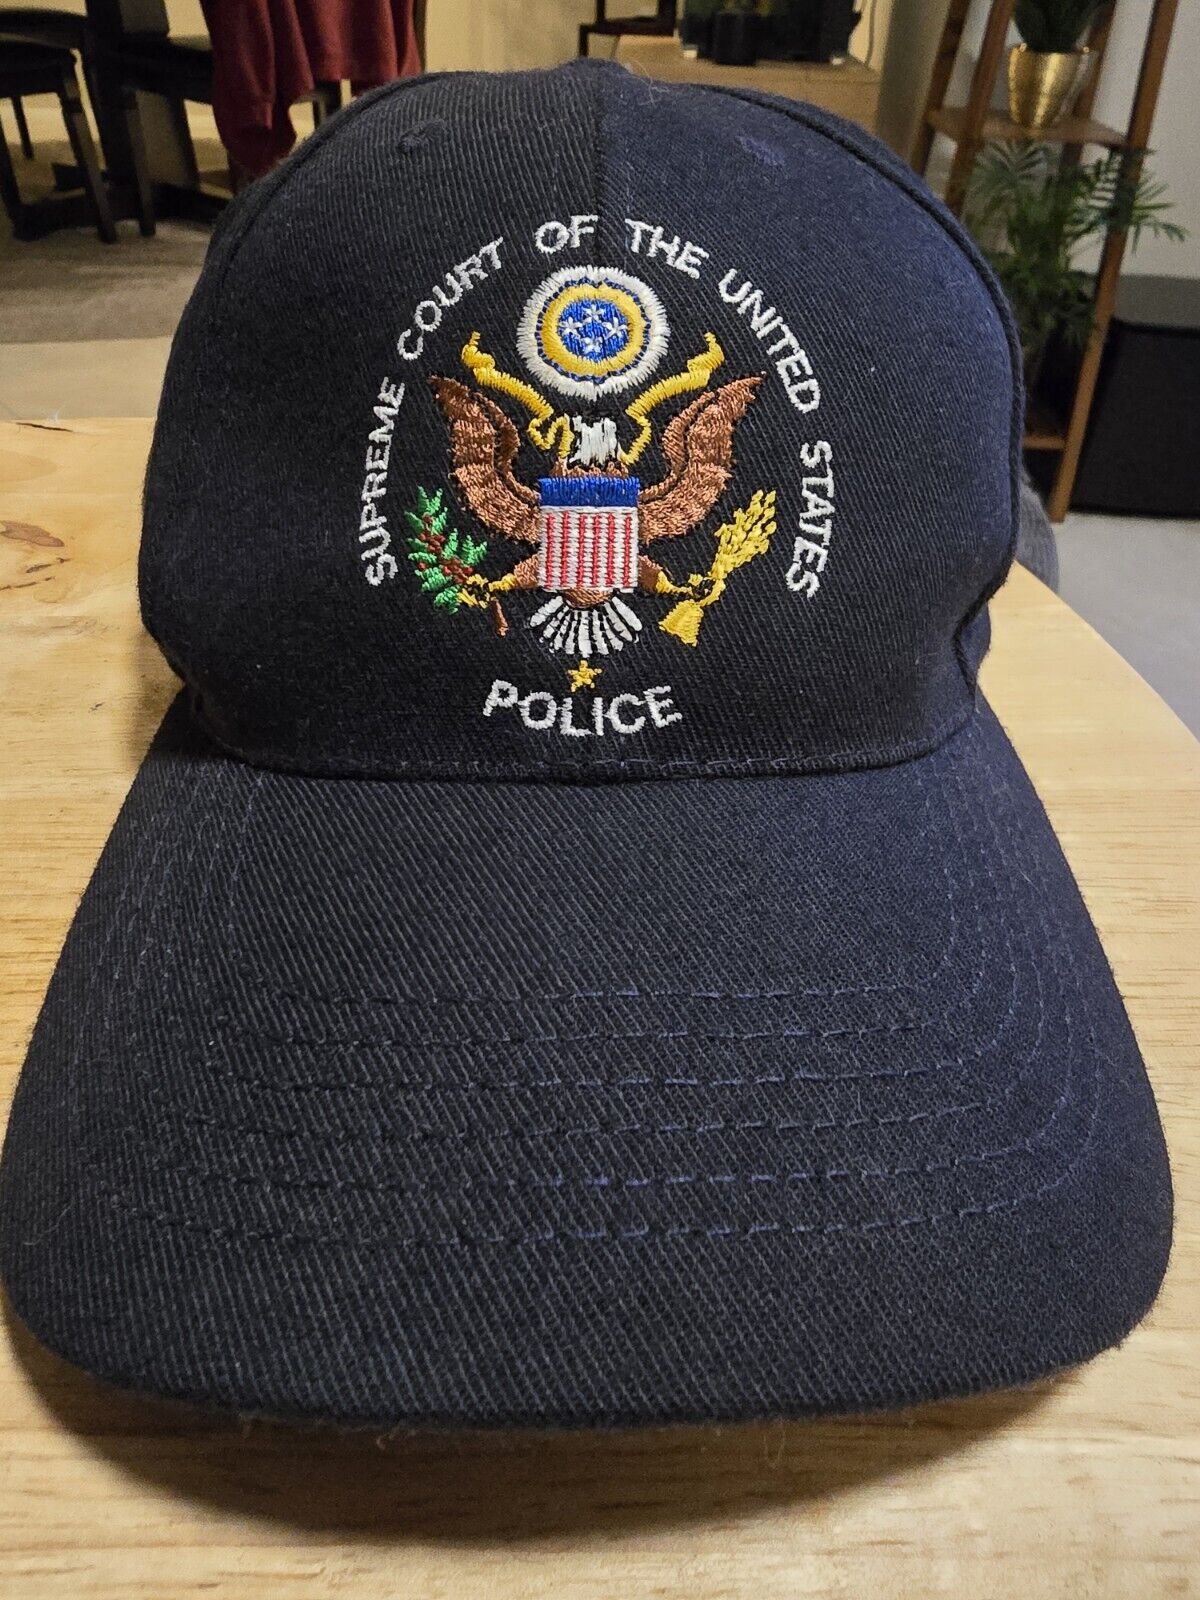 Supreme Court of the United States Police hat